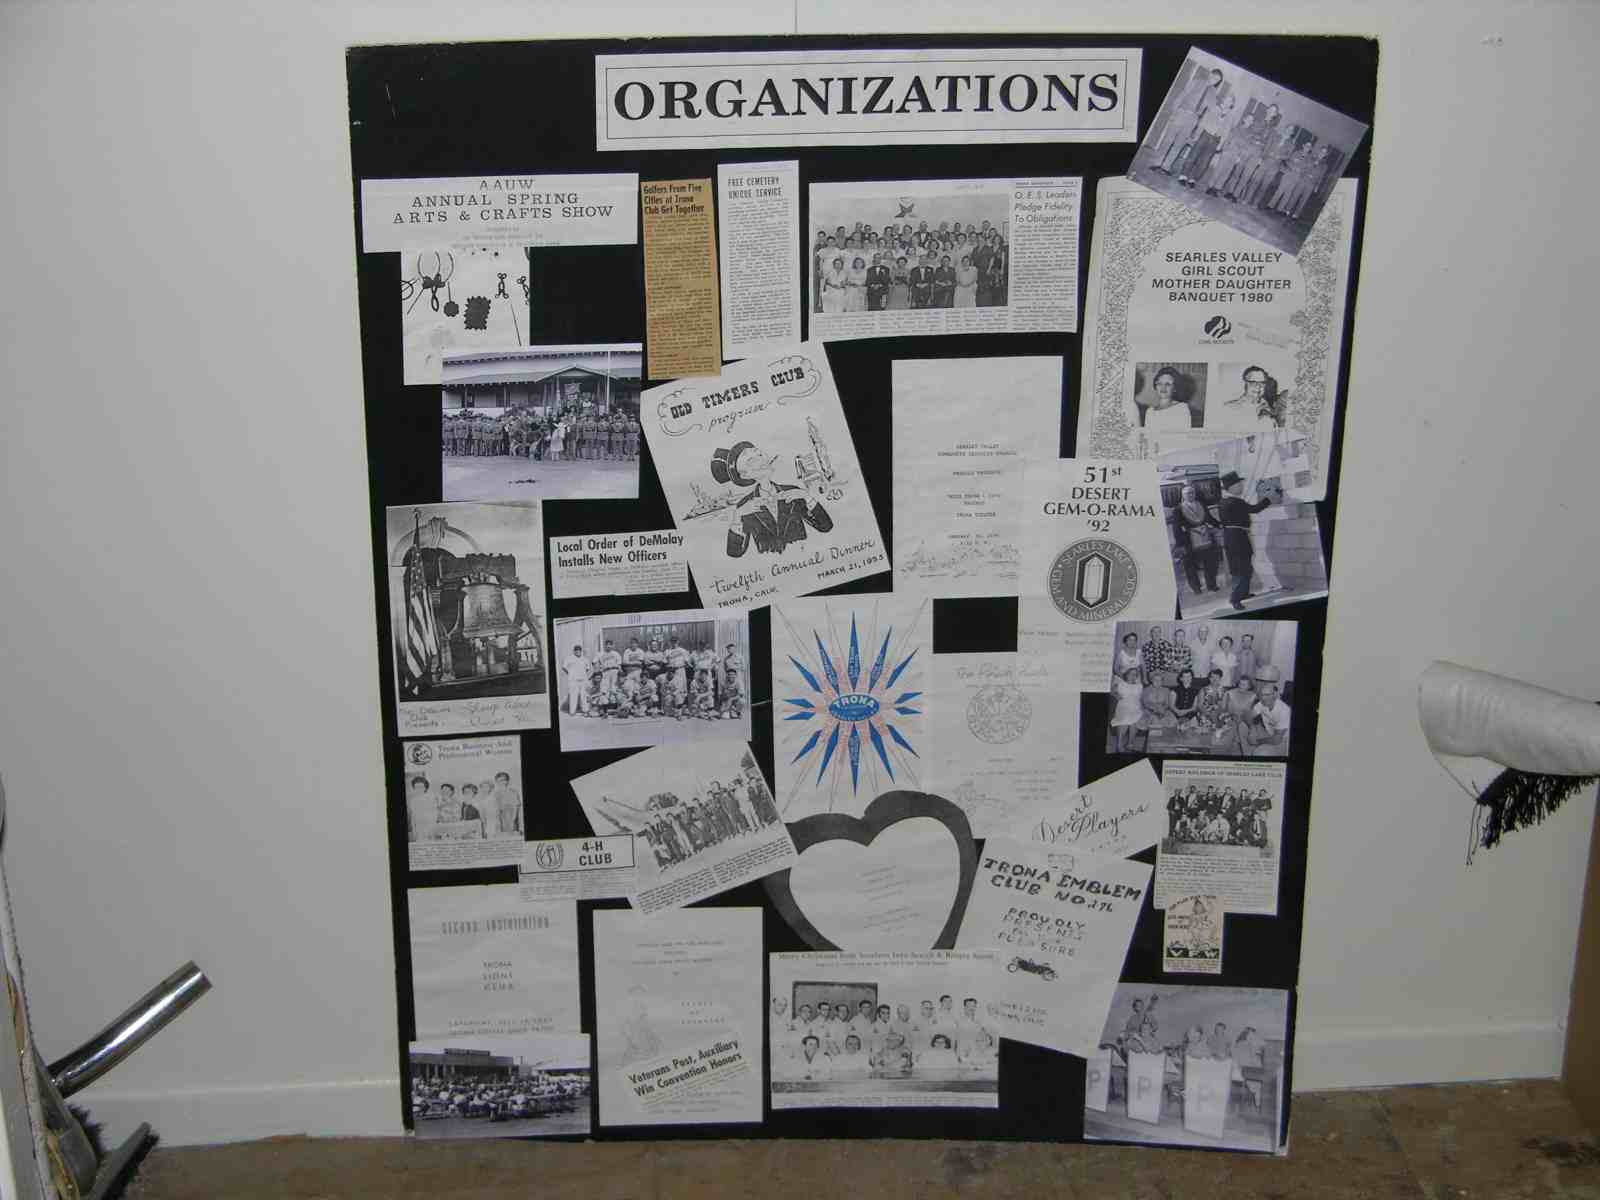 Poster of Organizations